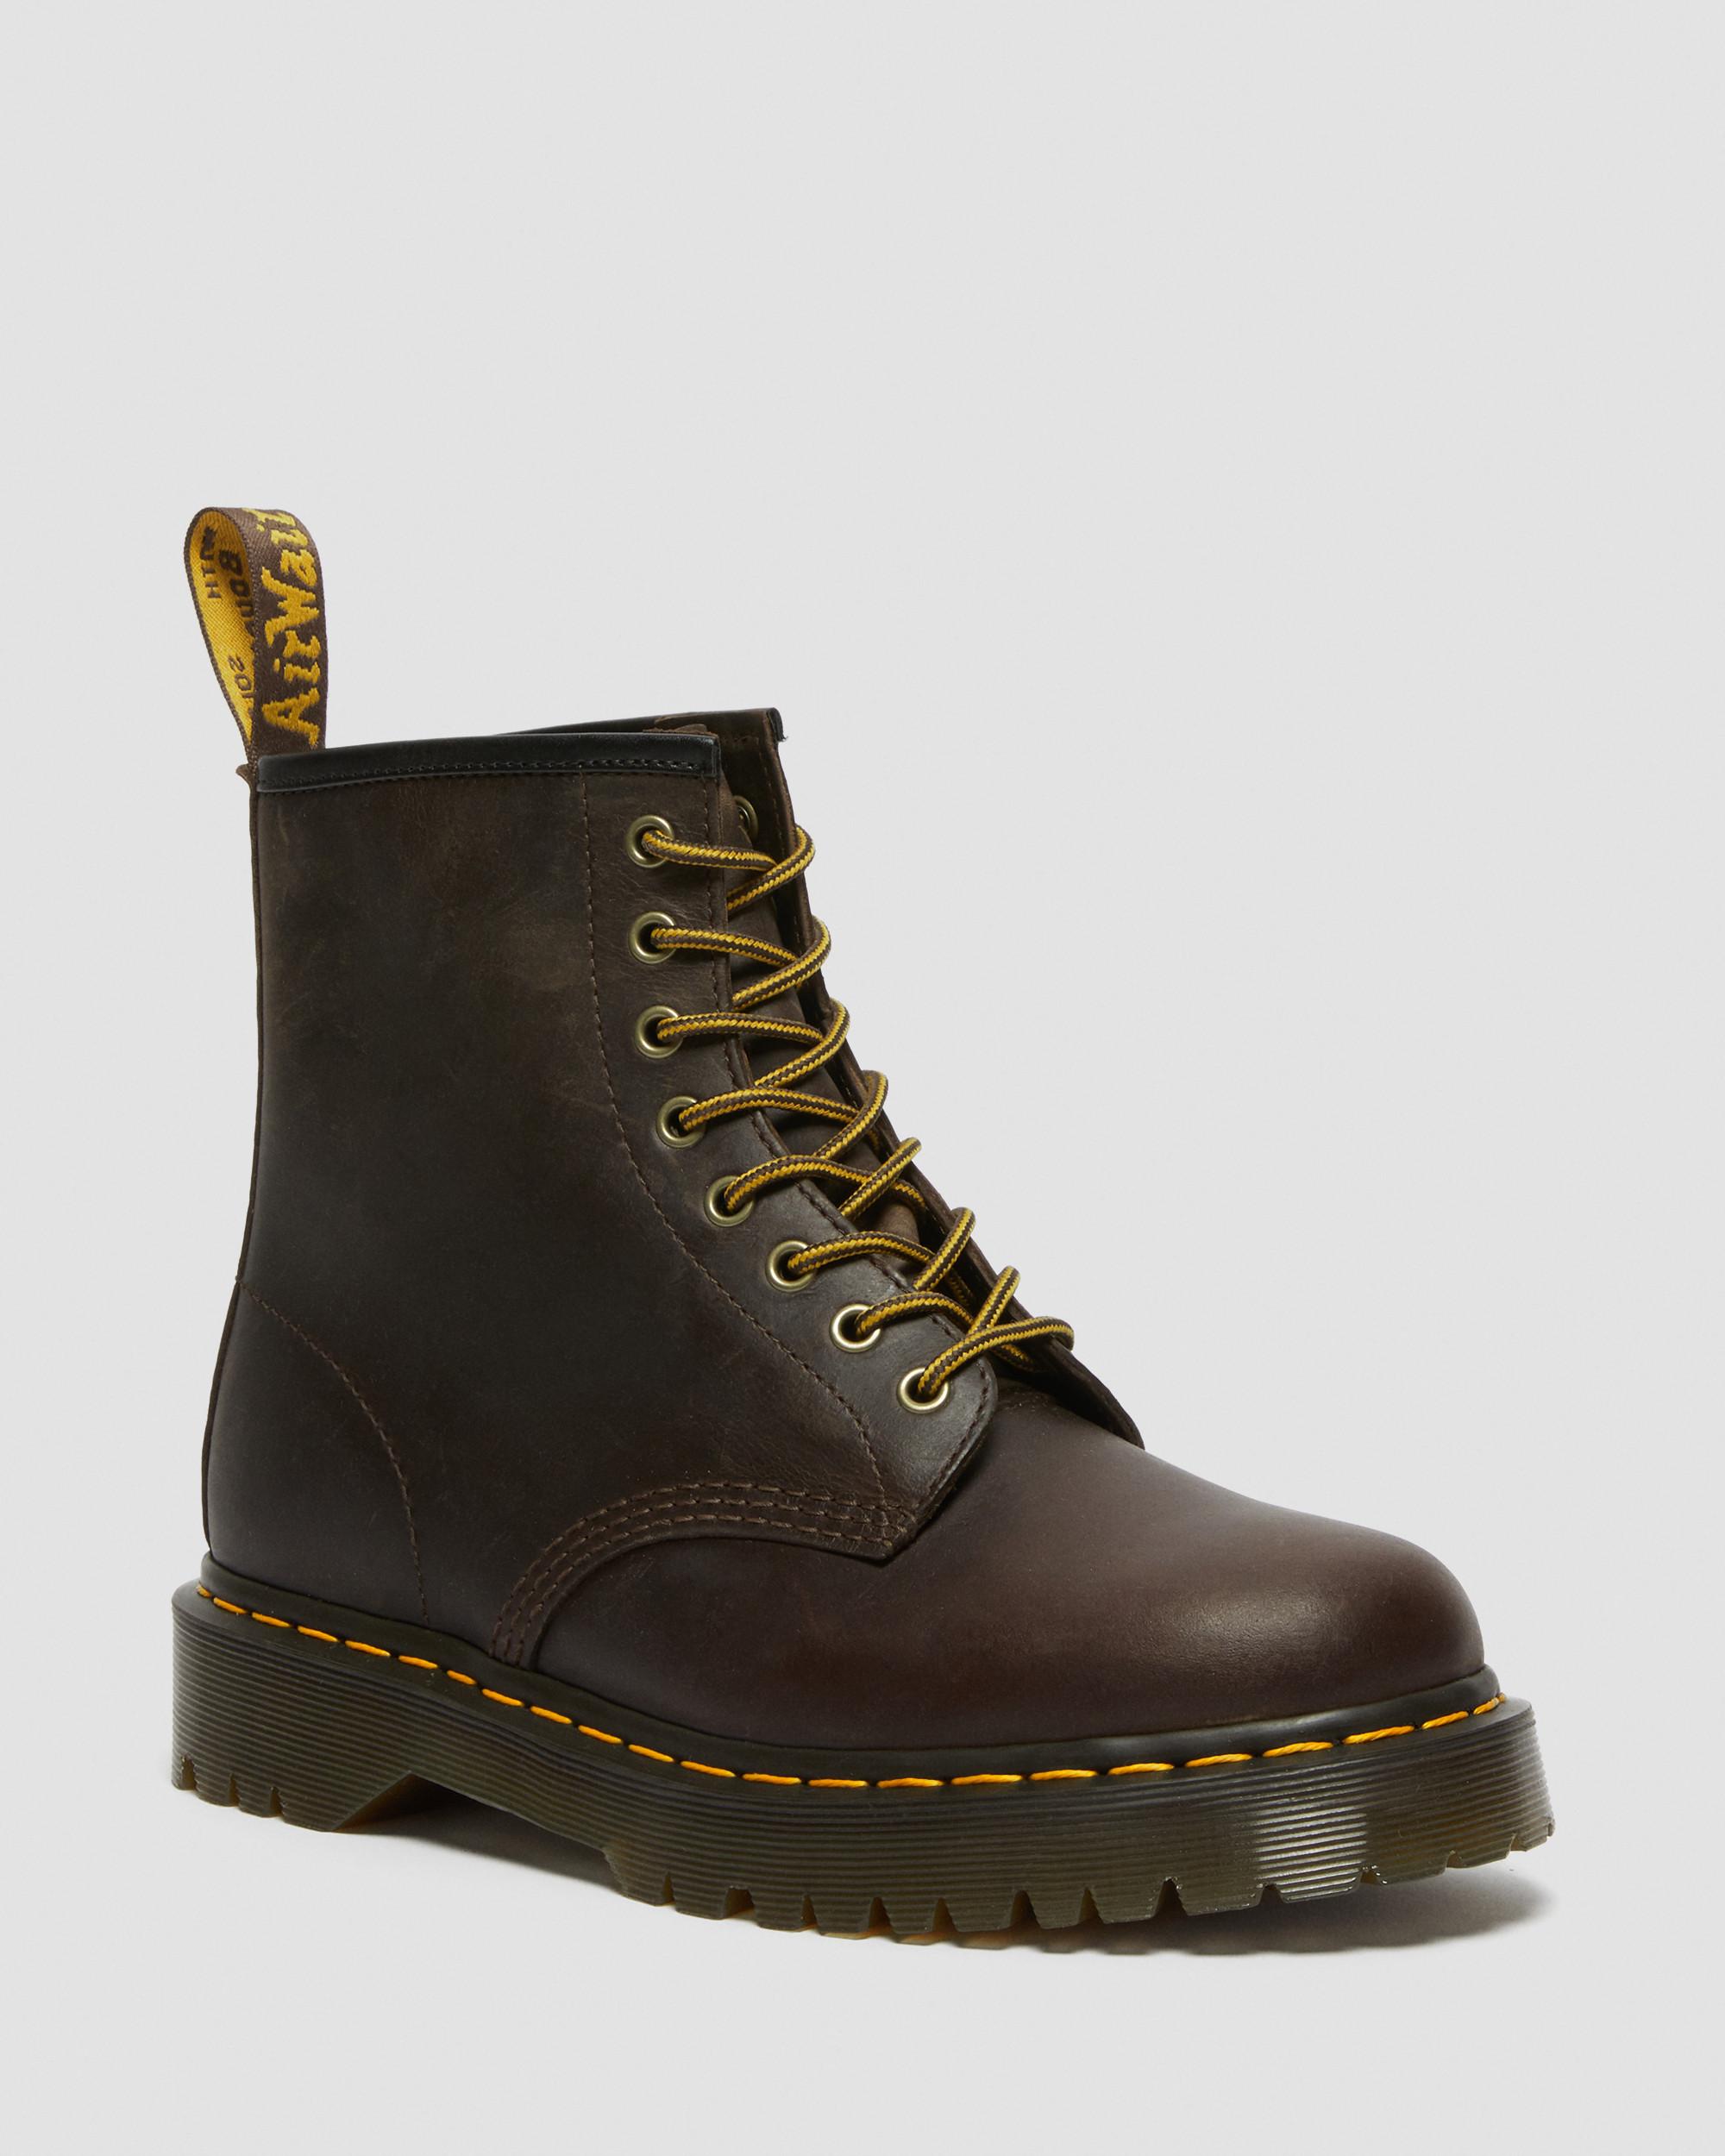 1460 Bex Crazy Horse Leather Lace Up Boots, Dark Brown | Dr. Martens